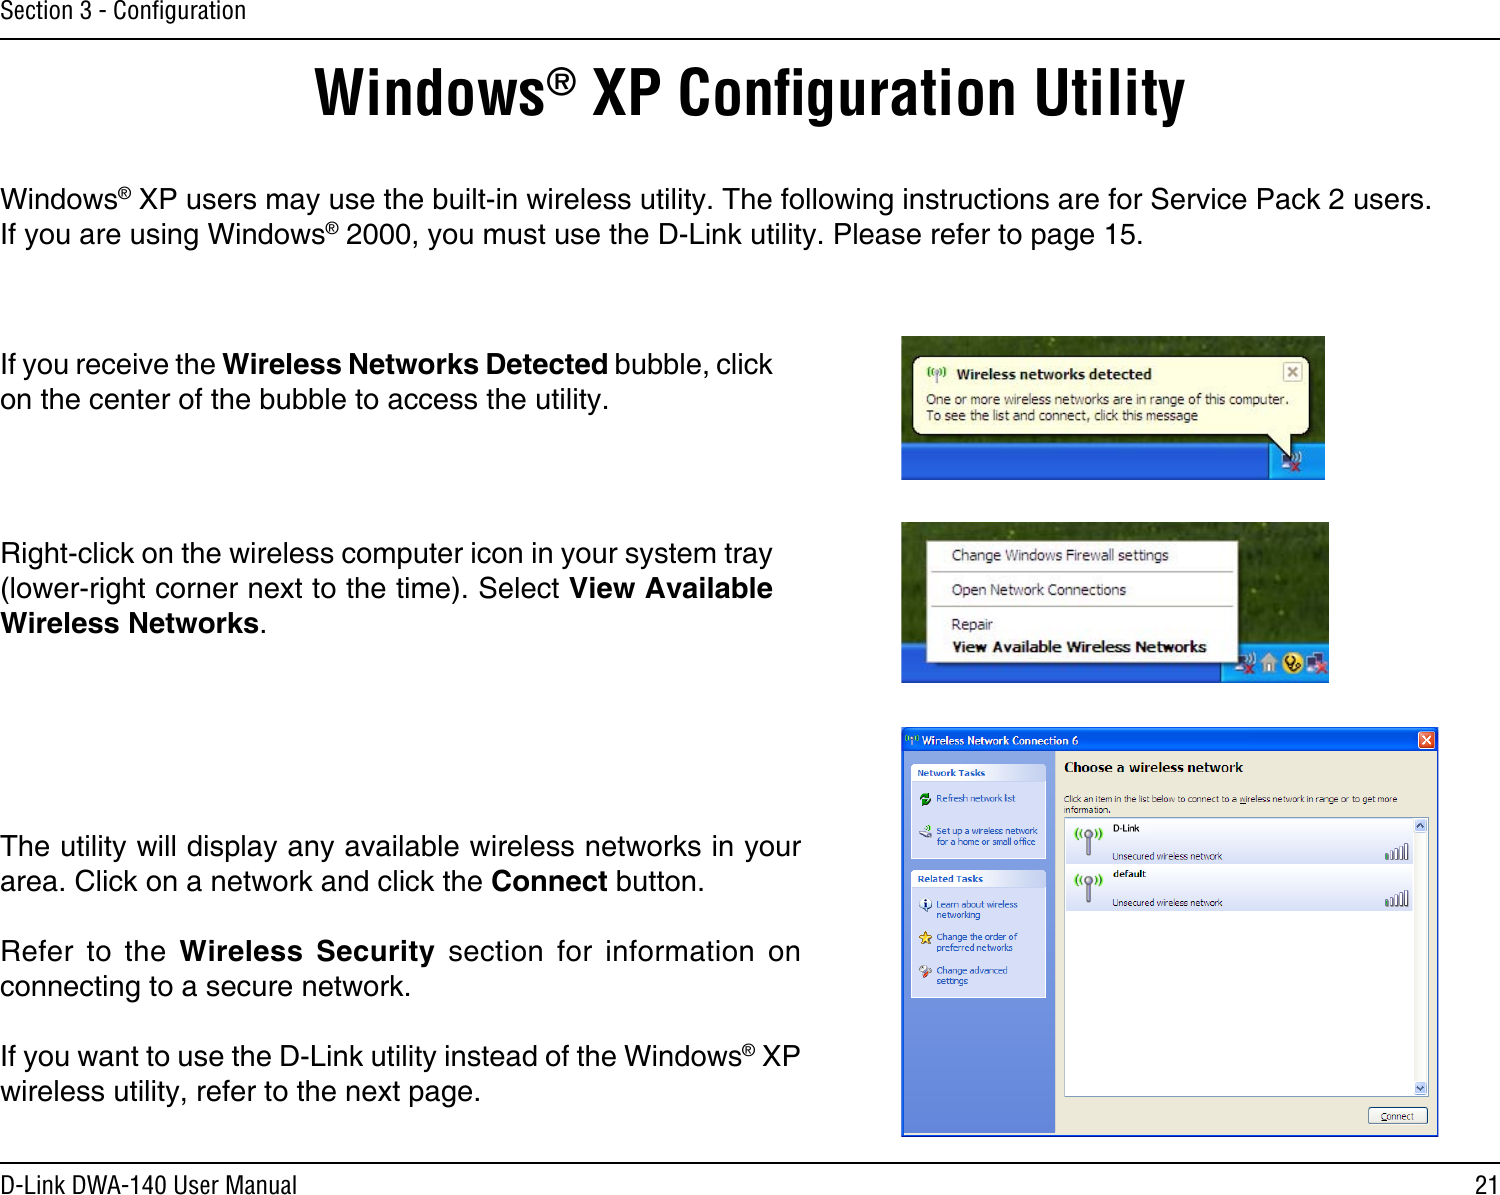 21D-Link DWA-140 User ManualSection 3 - ConﬁgurationWindows® XP Conﬁguration UtilityWindows® XP users may use the built-in wireless utility. The following instructions are for Service Pack 2 users. If you are using Windows® 2000, you must use the D-Link utility. Please refer to page 15.Right-click on the wireless computer icon in your system tray (lower-right corner next to the time). Select View Available Wireless Networks.If you receive the Wireless Networks Detected bubble, click on the center of the bubble to access the utility.The utility will display any available wireless networks in your area. Click on a network and click the Connect button.Refer  to  the  Wireless  Security  section  for  information  on connecting to a secure network.If you want to use the D-Link utility instead of the Windows® XP wireless utility, refer to the next page.